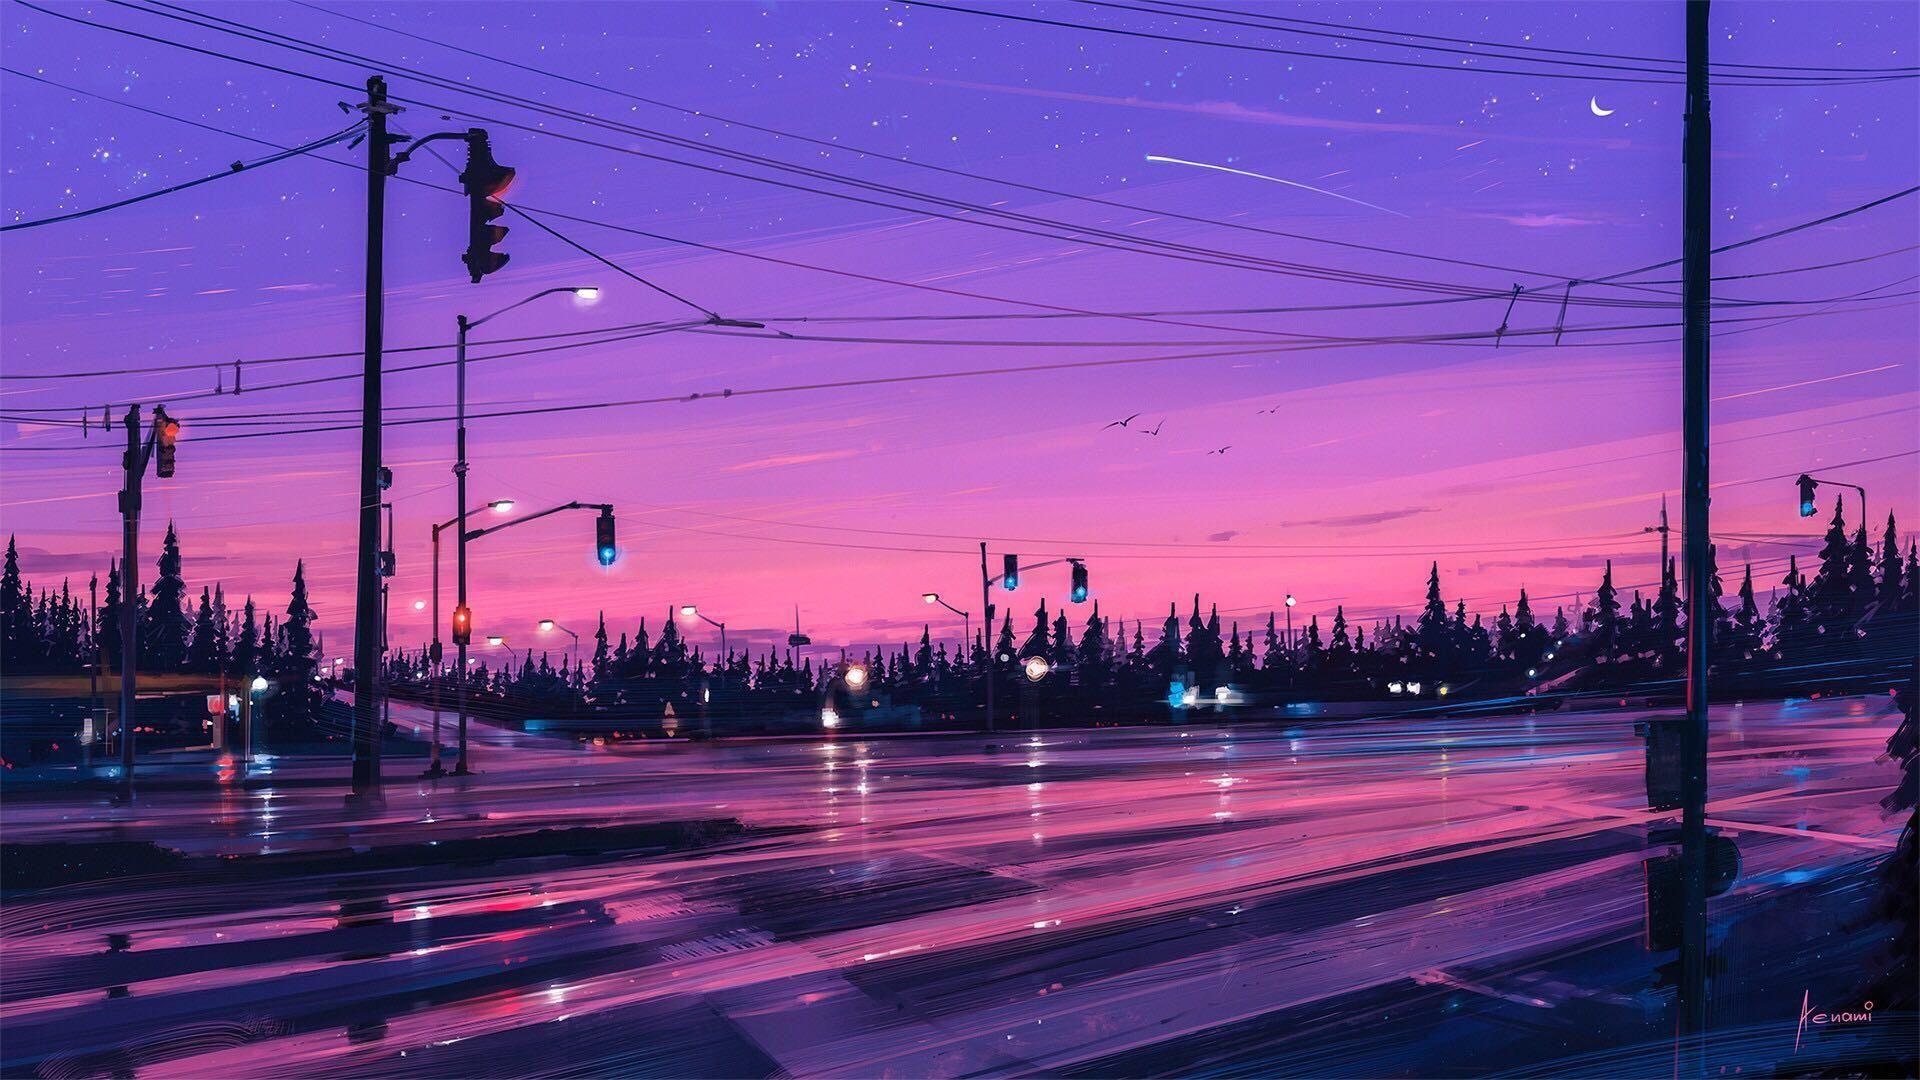 A painting of an intersection at night - Desktop, HD, 1920x1080, landscape, scenery, road, lo fi